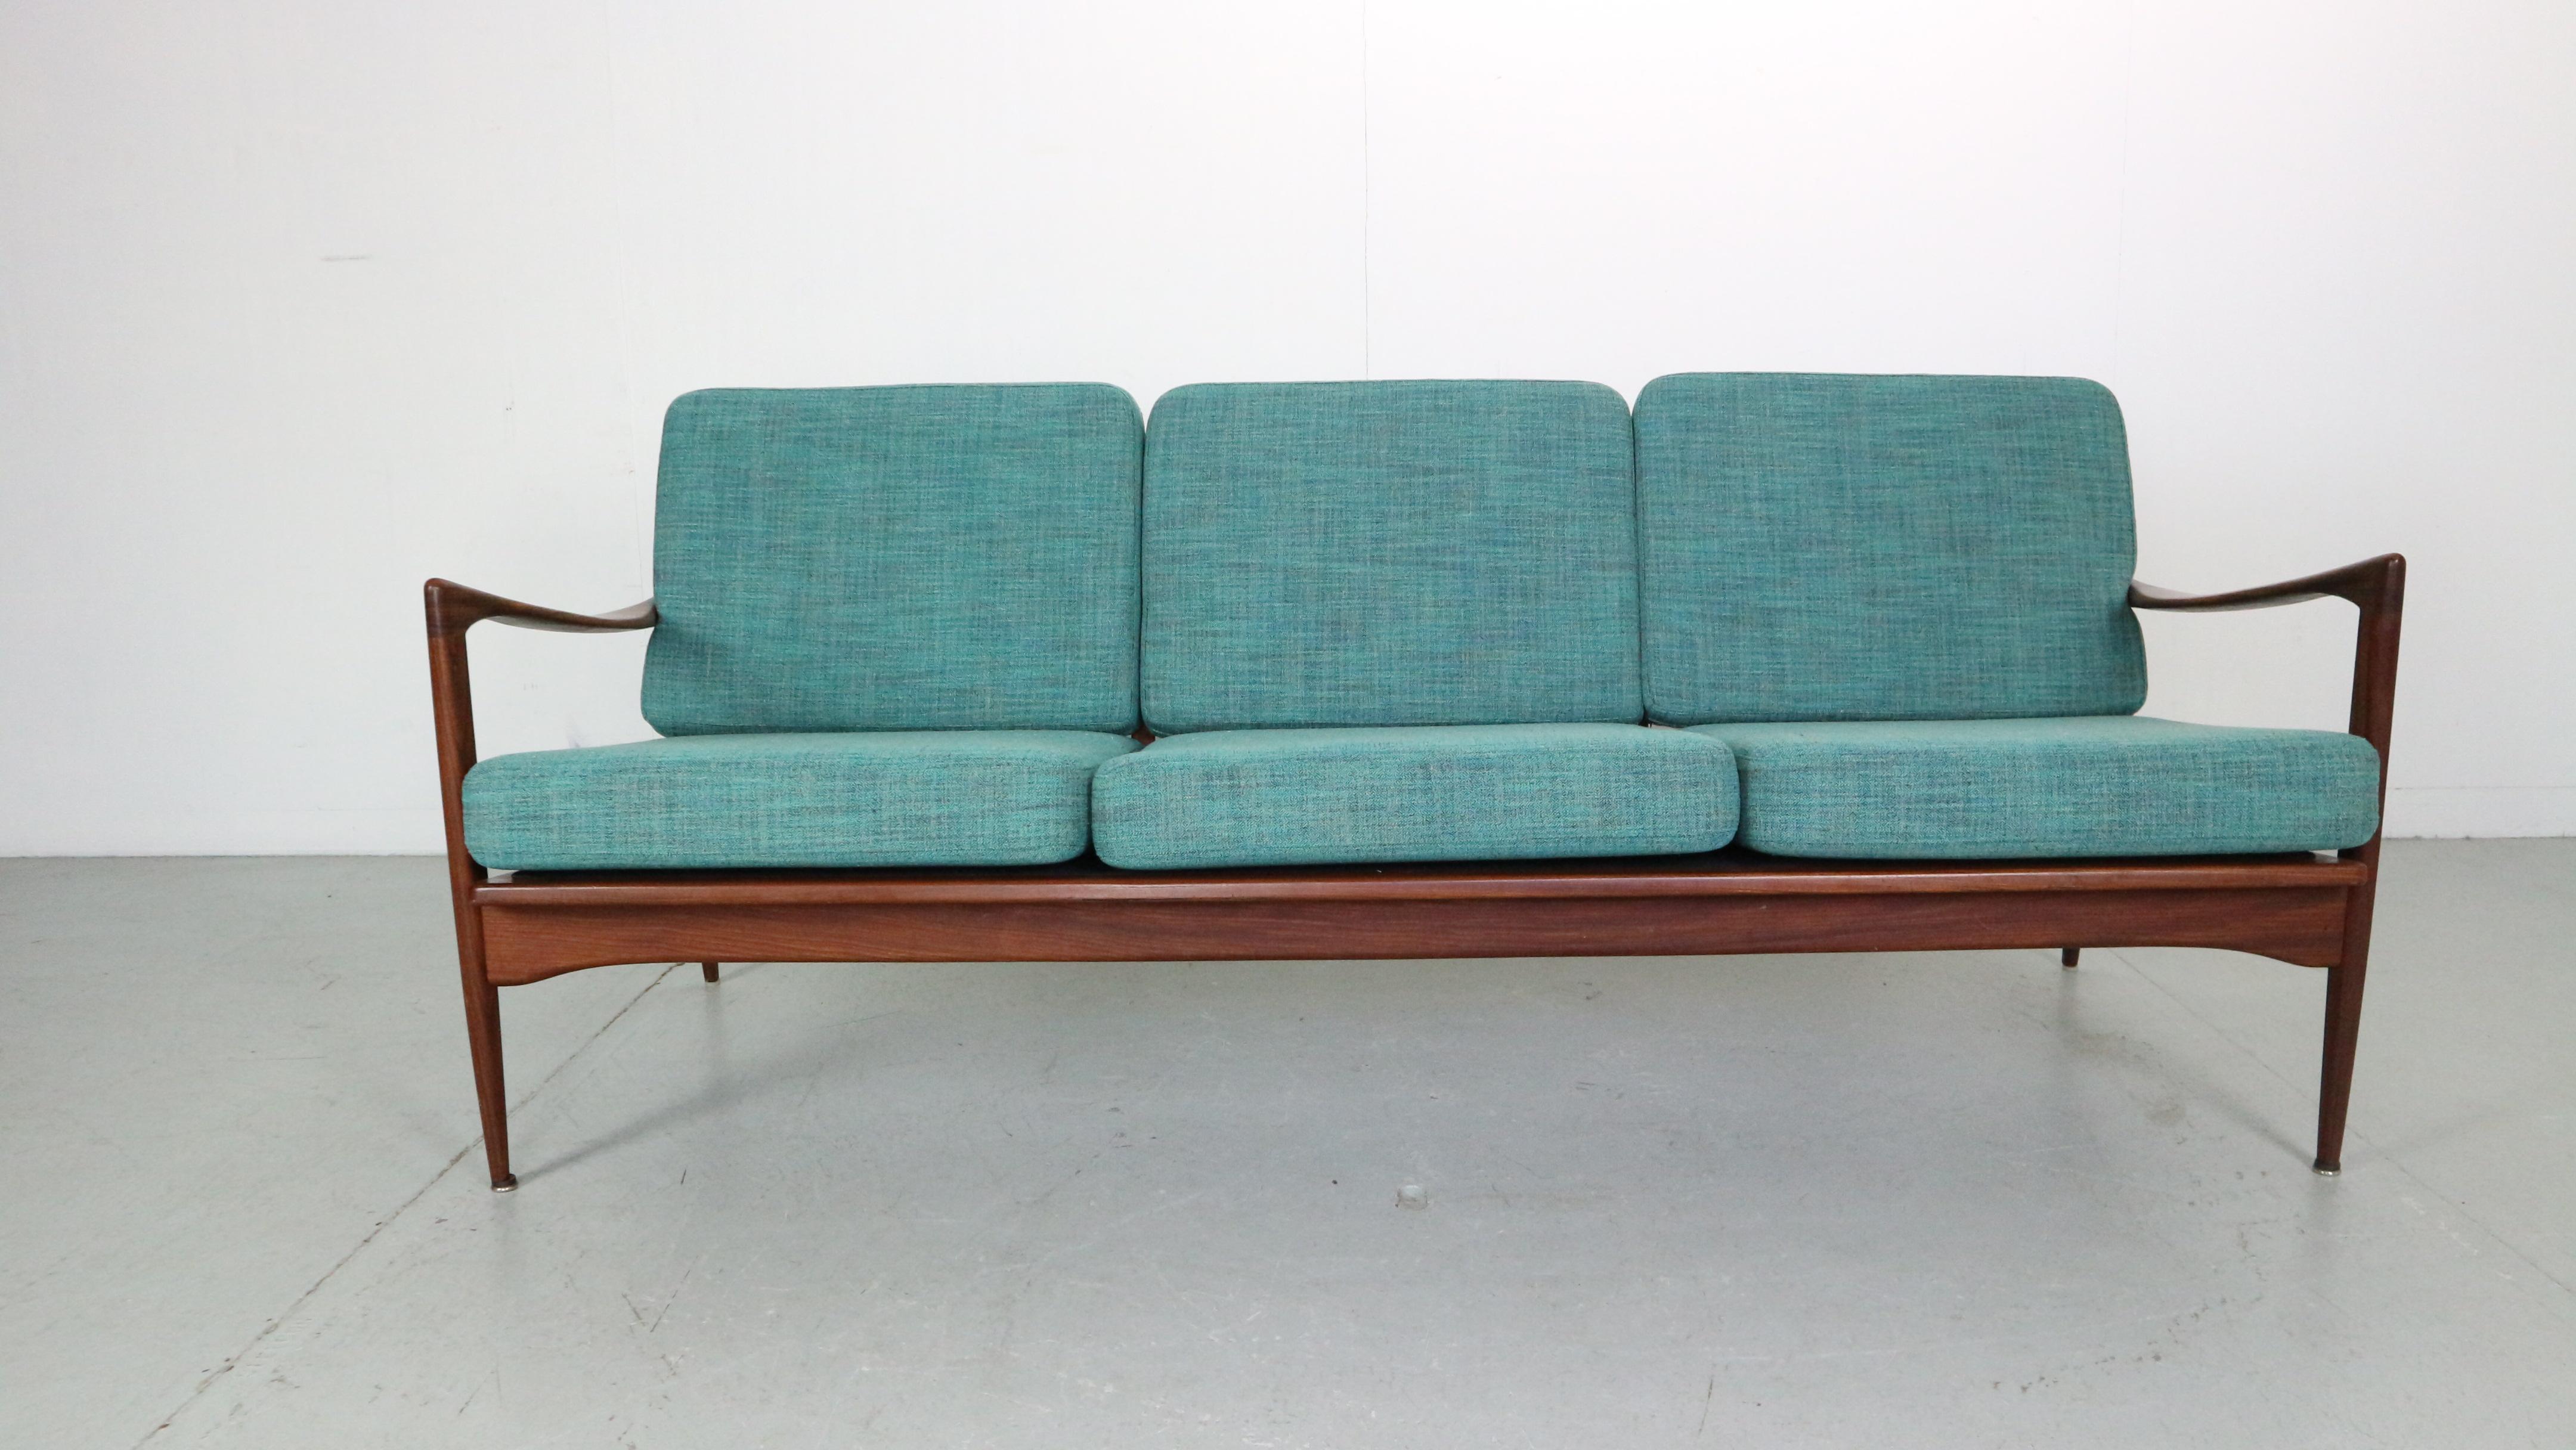 Stunning vintage three-seater sofa designed by Danish designer Ib Kofod-Larsen for Ope, Sweden. This model Kandidaten sofa features a stylish 1950’s design, teak afrormosia frame and comfortable seating. To ensure many more years of comfort we’ve